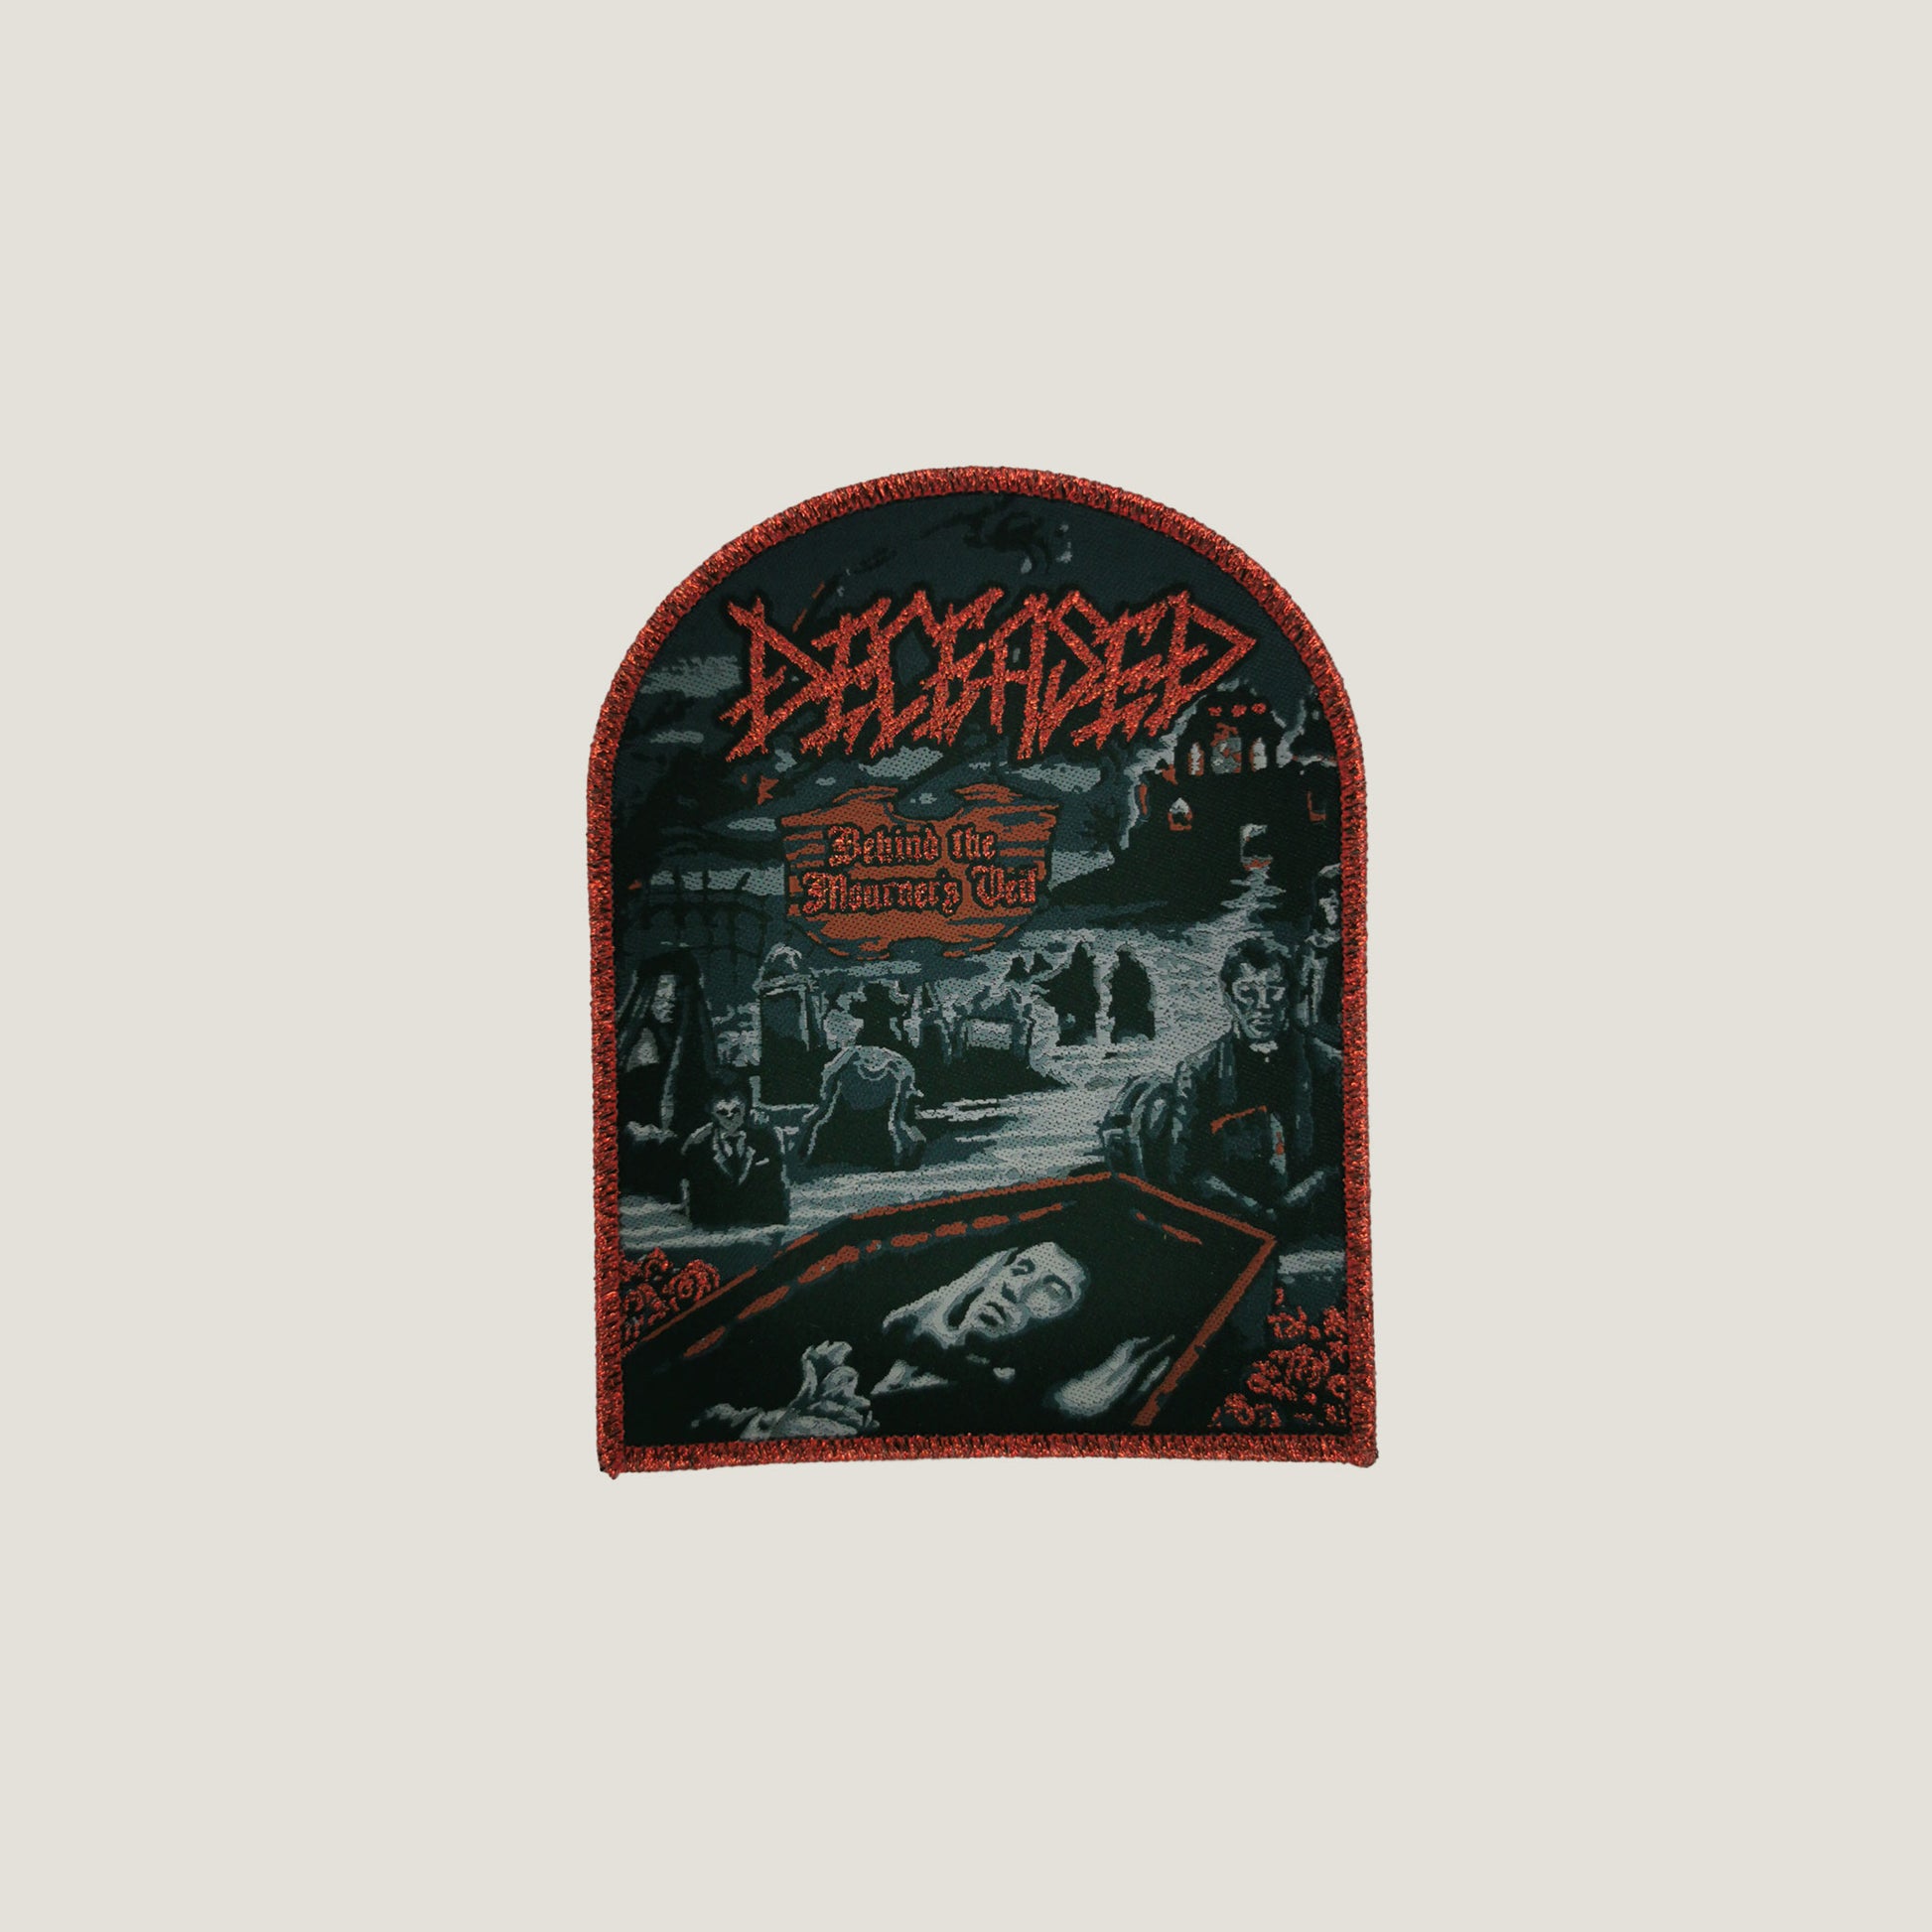 Temporal Dimensions Patches Deceased Behind the Mourners Veil Red Glitter Border Woven Patch